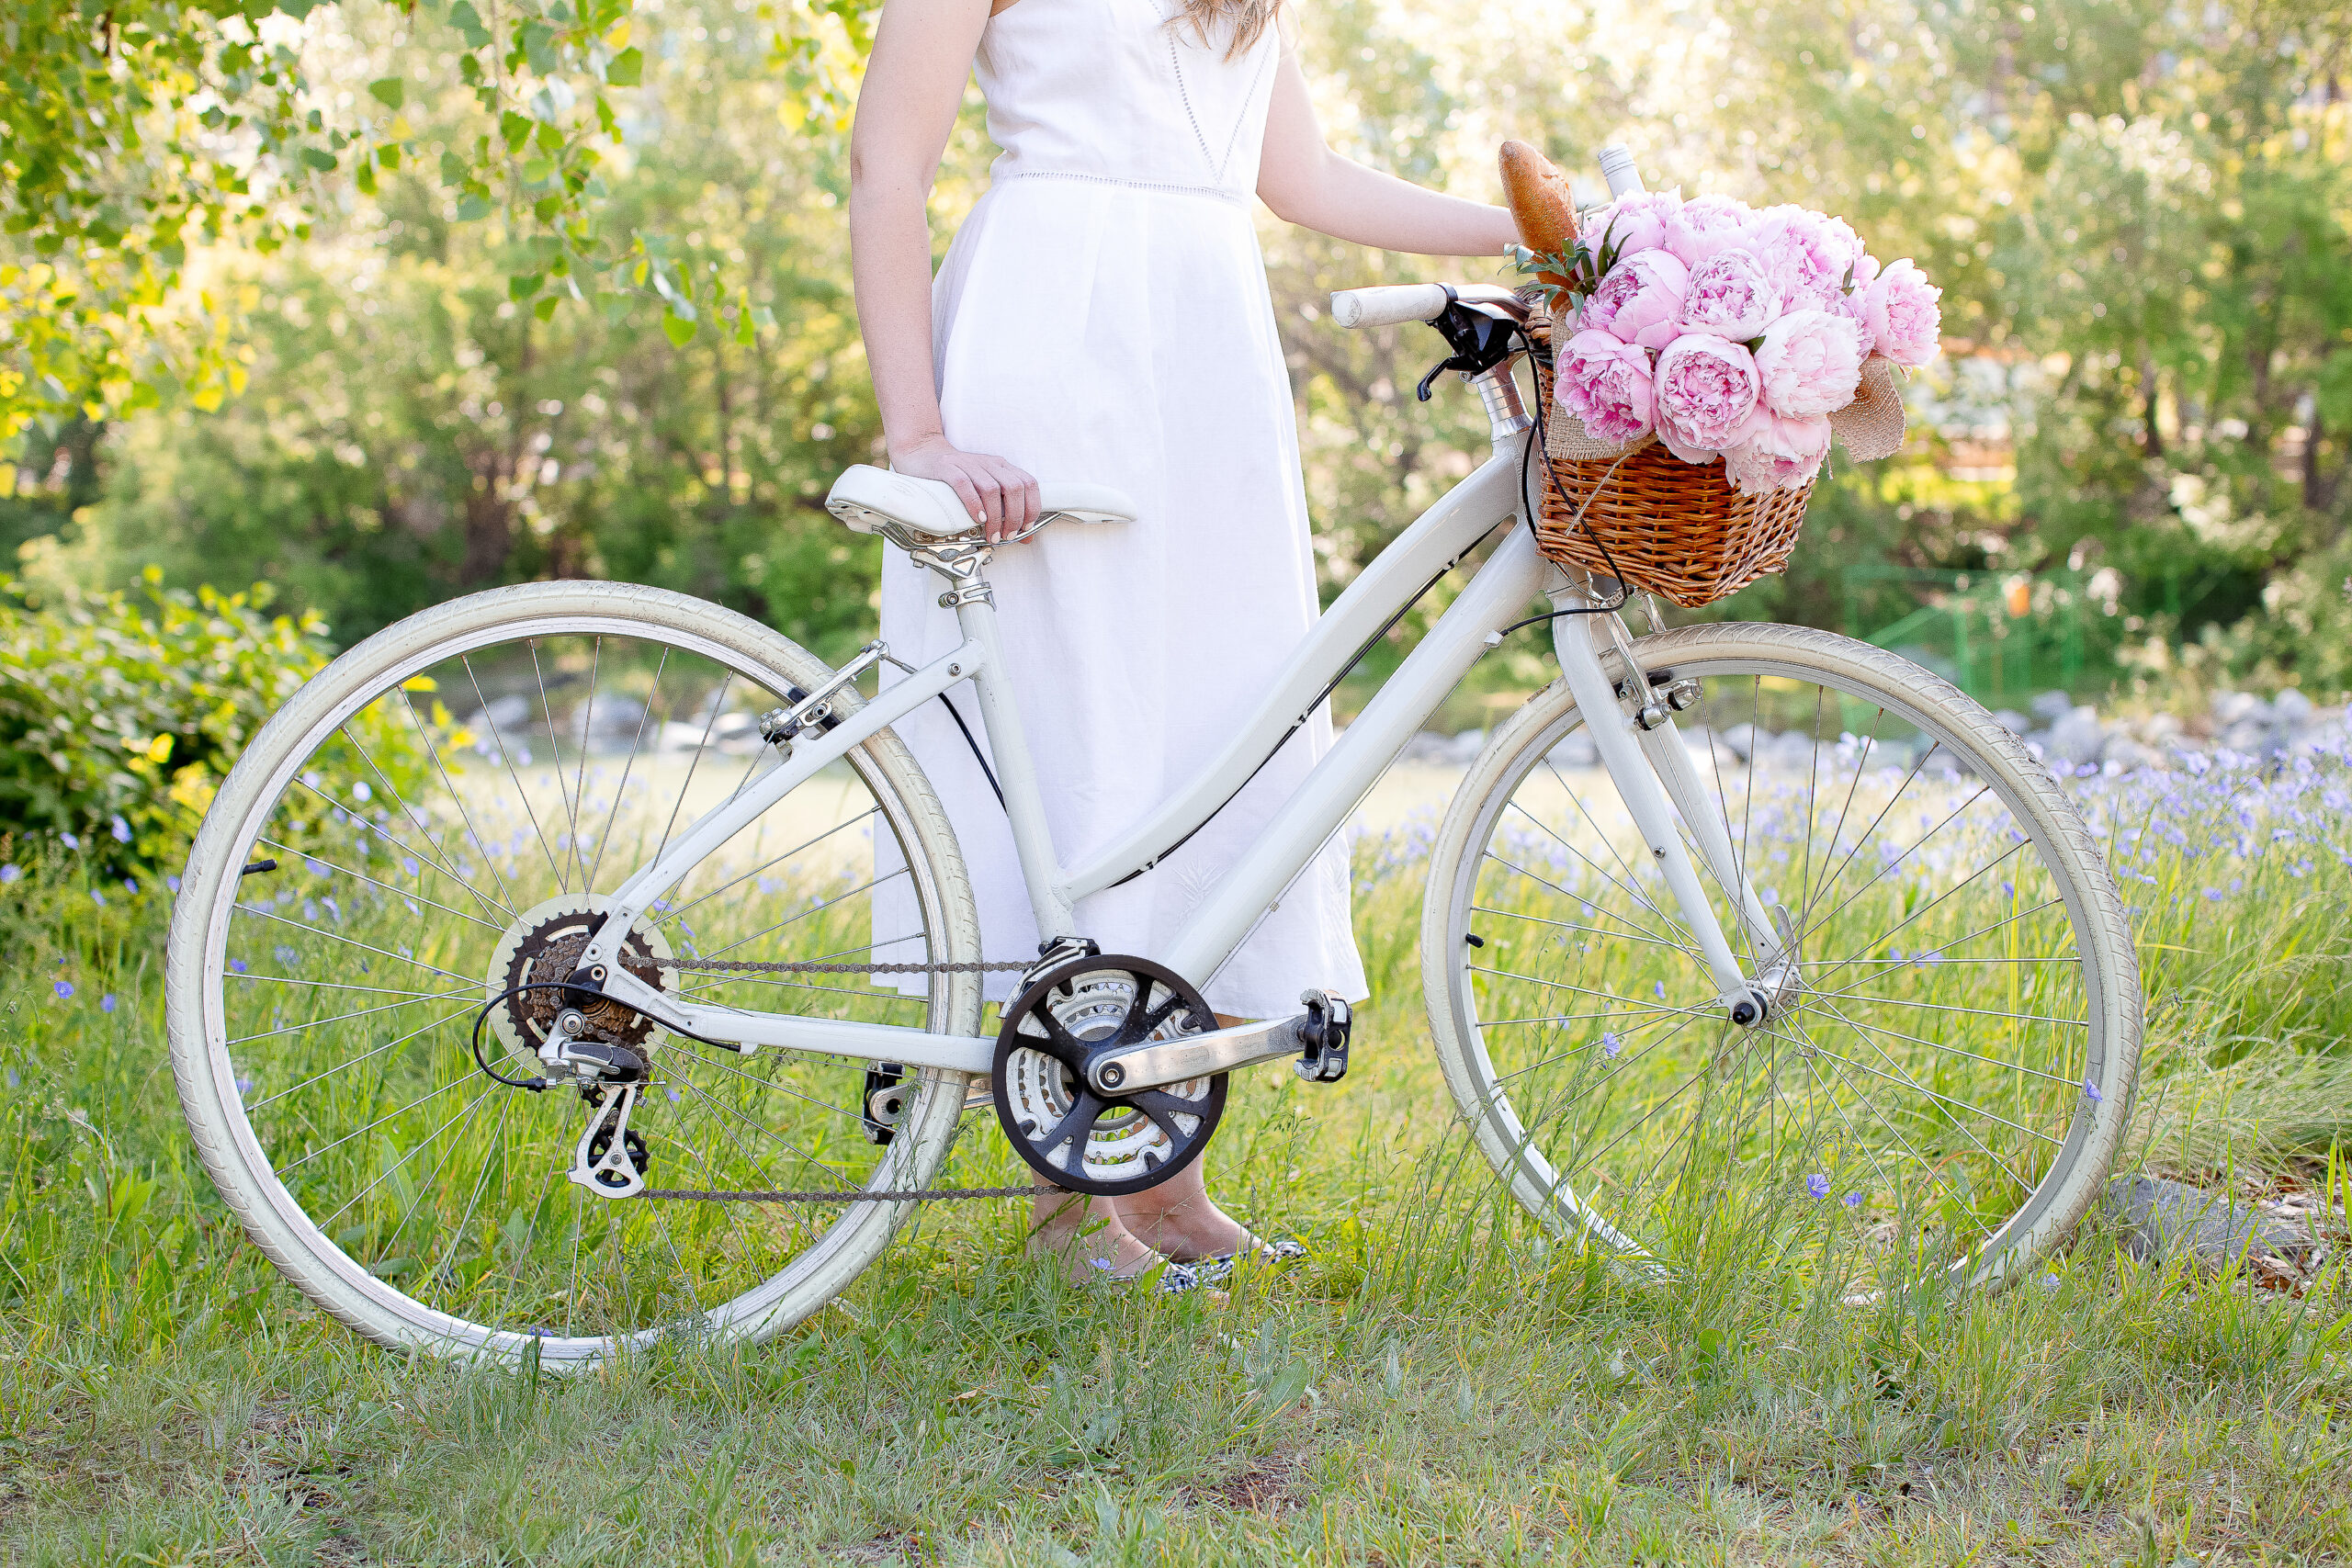 A person in a white dress stands beside a white bicycle with a basket full of pink flowers and baguettes, embracing the great outdoors in a grassy area.